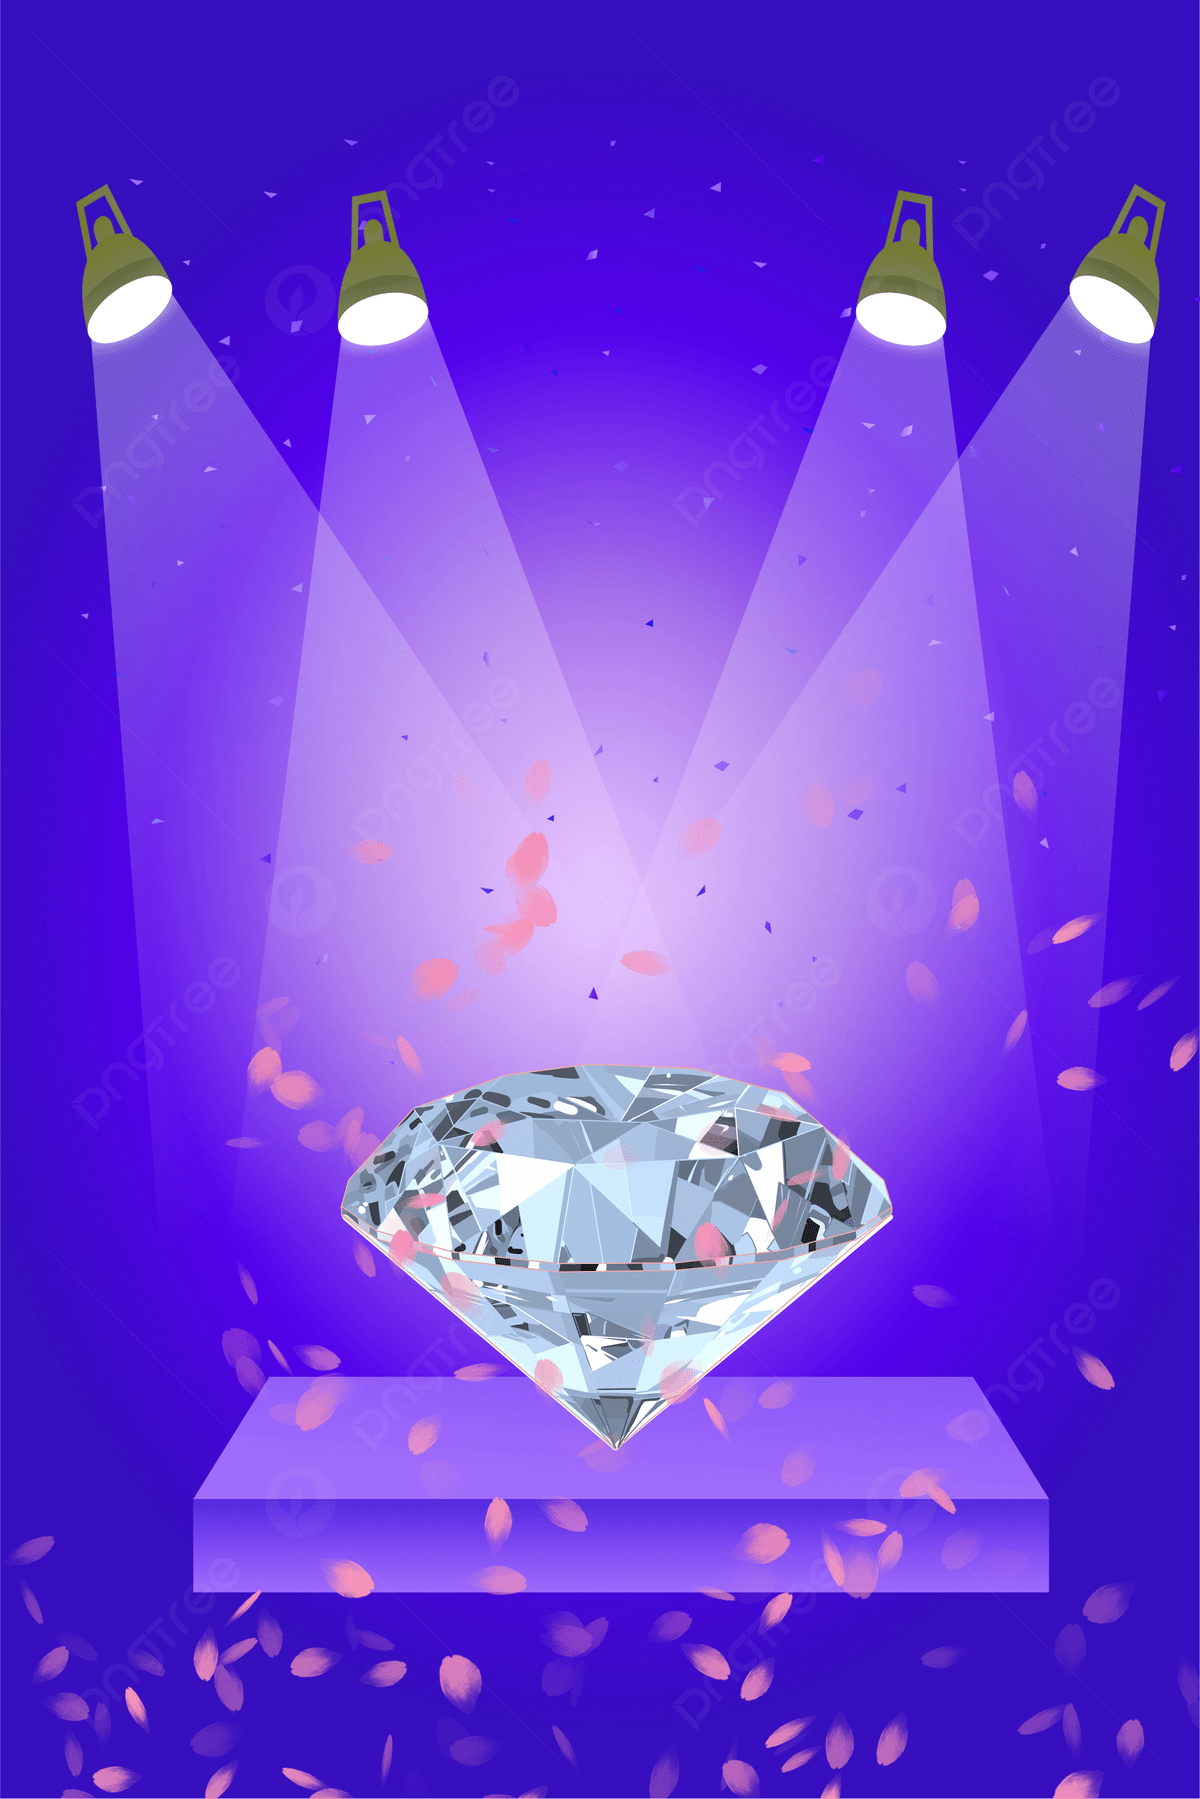 Diamond Background Image, HD Picture and Wallpaper For Free Download